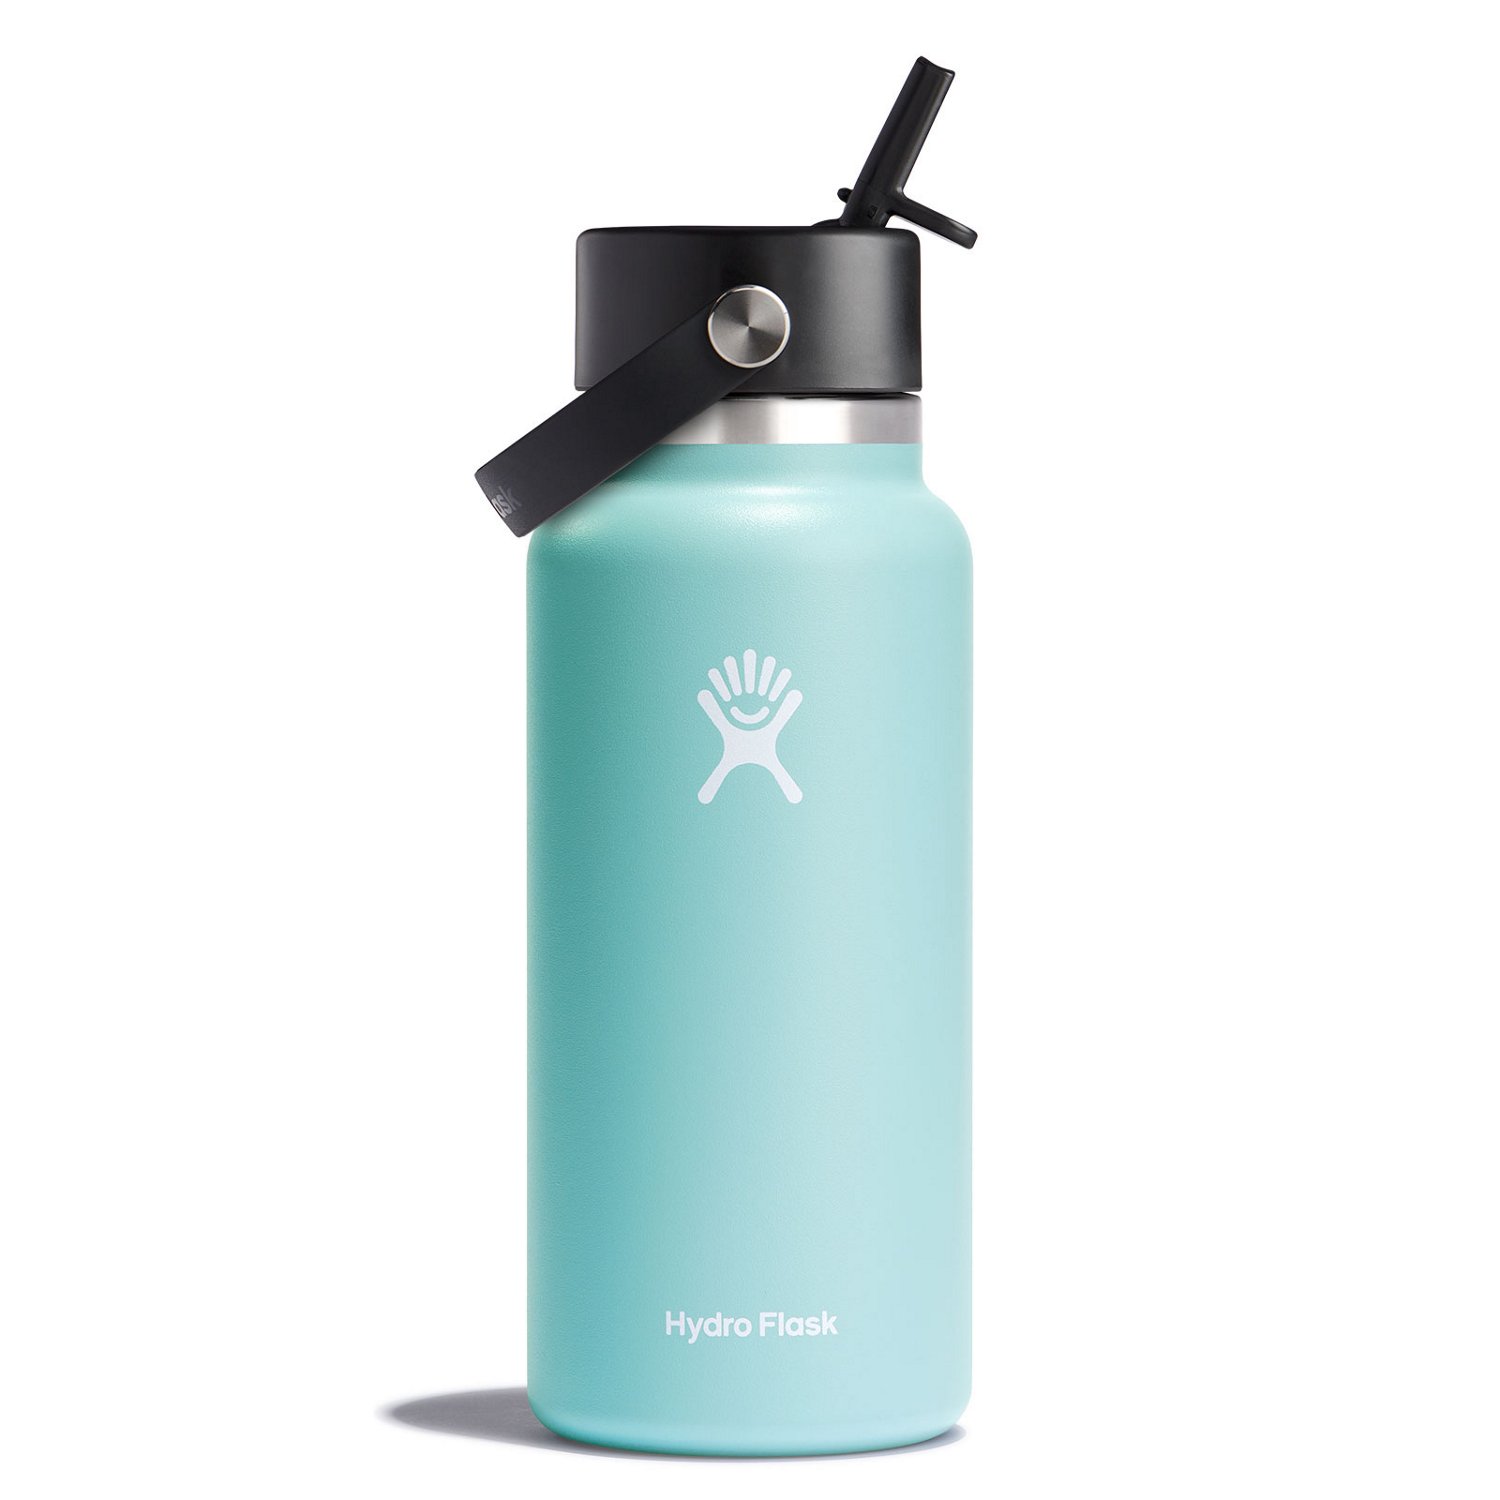 https://academy.scene7.com/is/image/academy///camping/drinkware/blue_hydro-flask-32-oz-wide-mouth-water-bottle-with-flex-straw-cap_w32bfs441/8a29d971498b438ab154e6fd8a36b6a9?$d-plp-product-image$